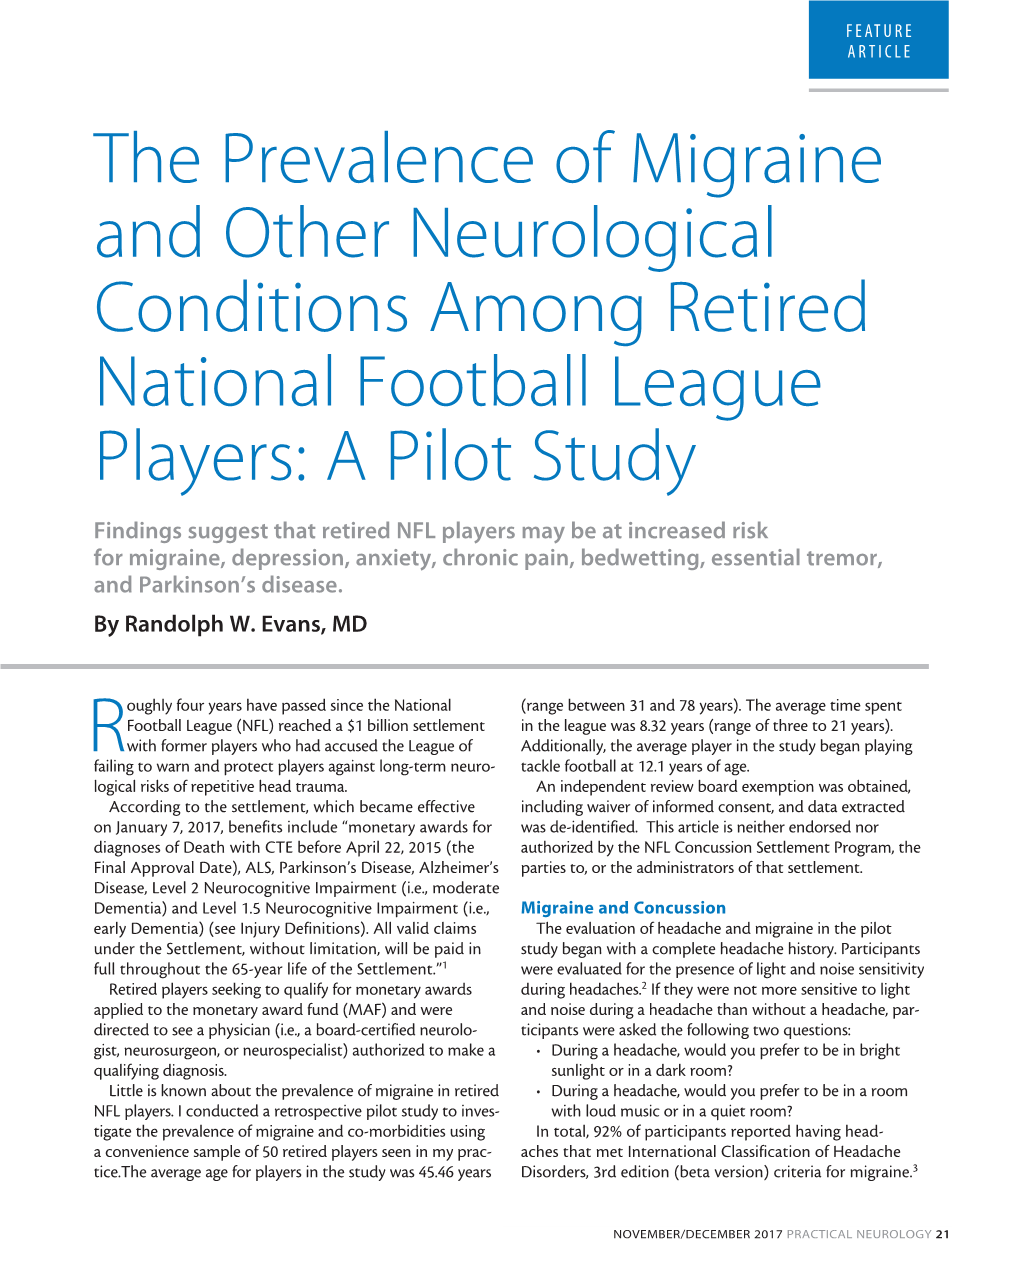 The Prevalence of Migraine and Other Neurological Conditions Among Retired National Football League Players